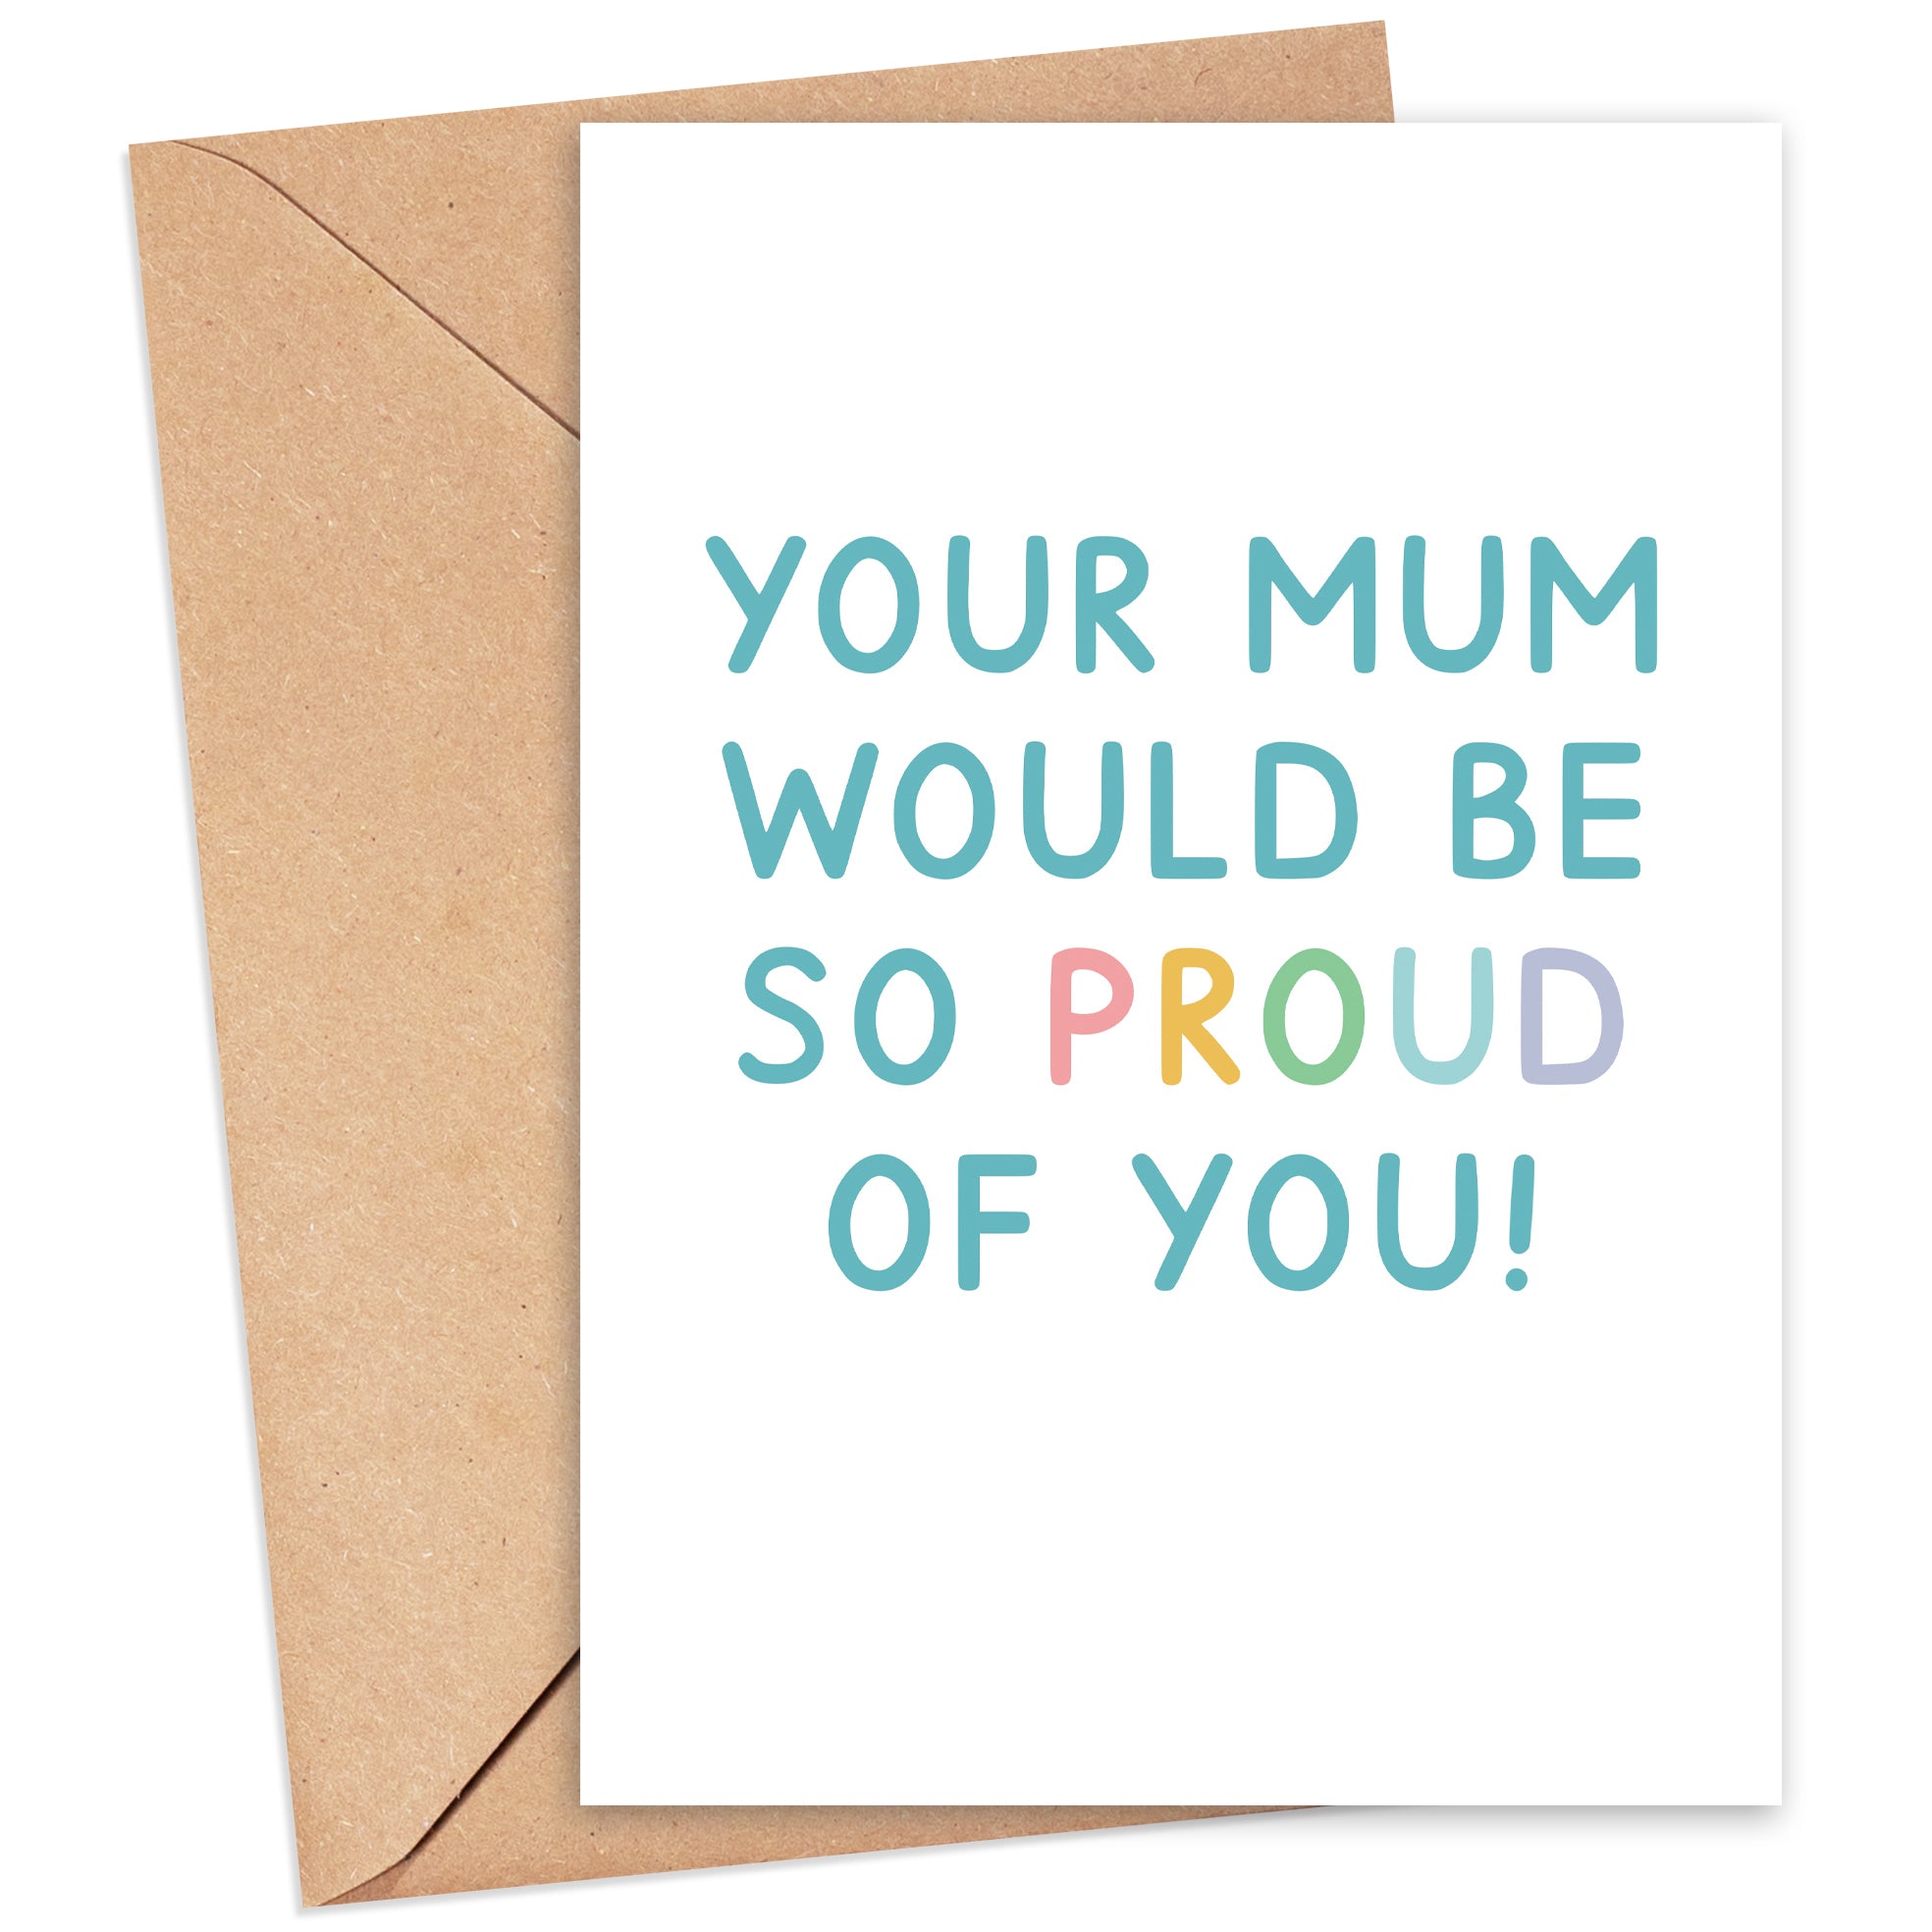 Mum Would Be Proud Of You Card